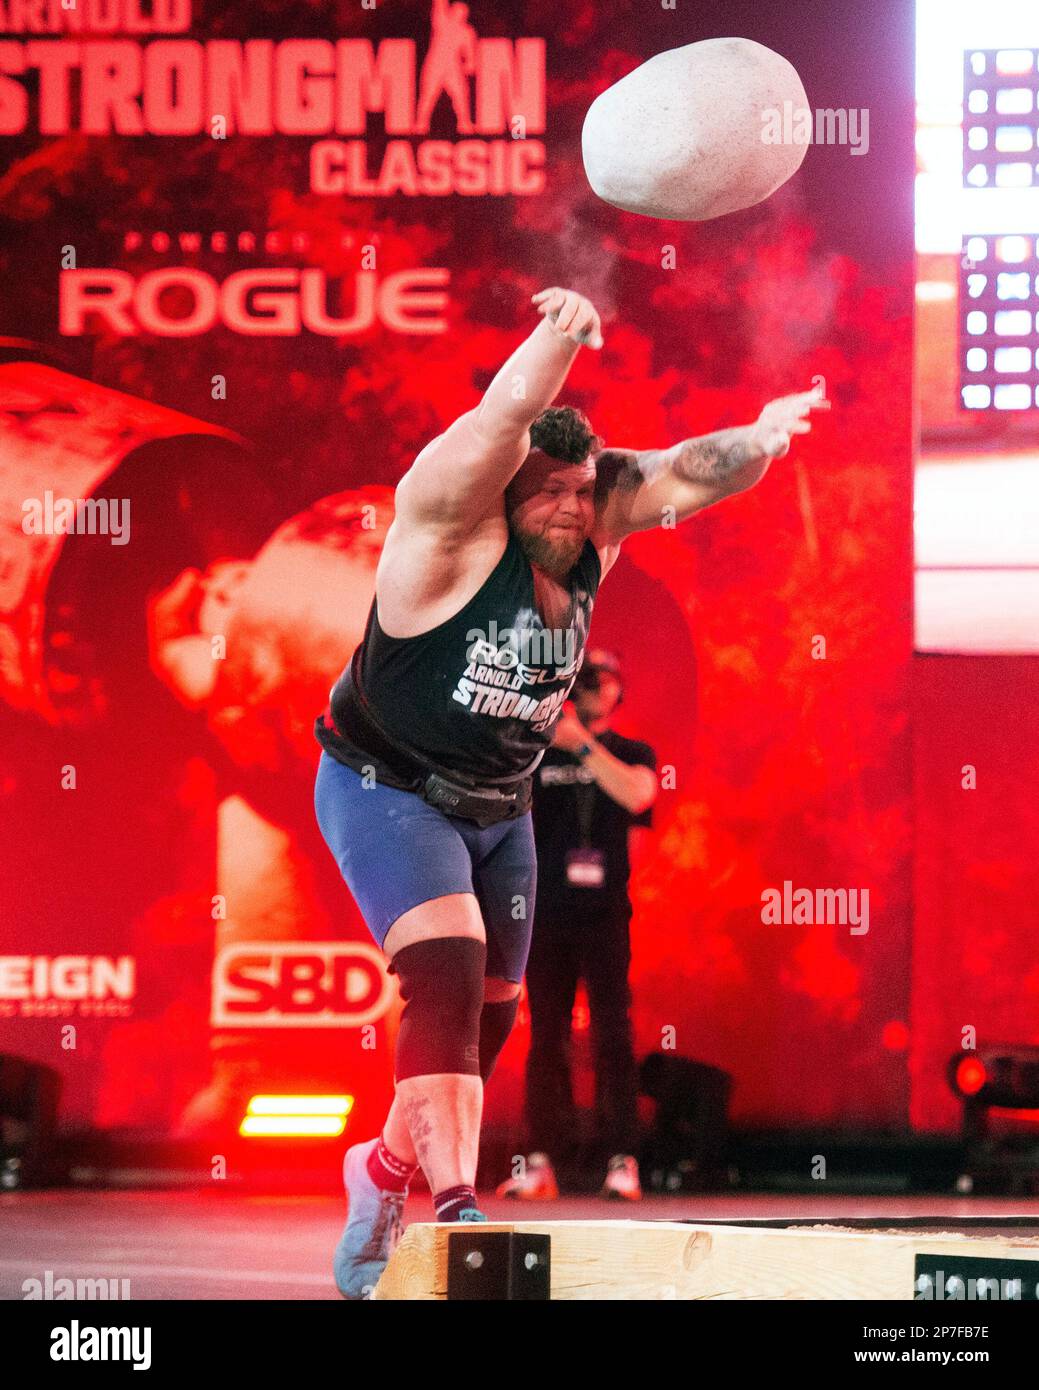 Columbus, Ohio, United States. 4th Mar, 2023. Tom Stolman (GBR) competes in the Men's Unspunnen Stone Throw at the Arnold Strongman Classic in Columbus, Ohio, USA. Credit: Brent Clark/Alamy Live News Stock Photo